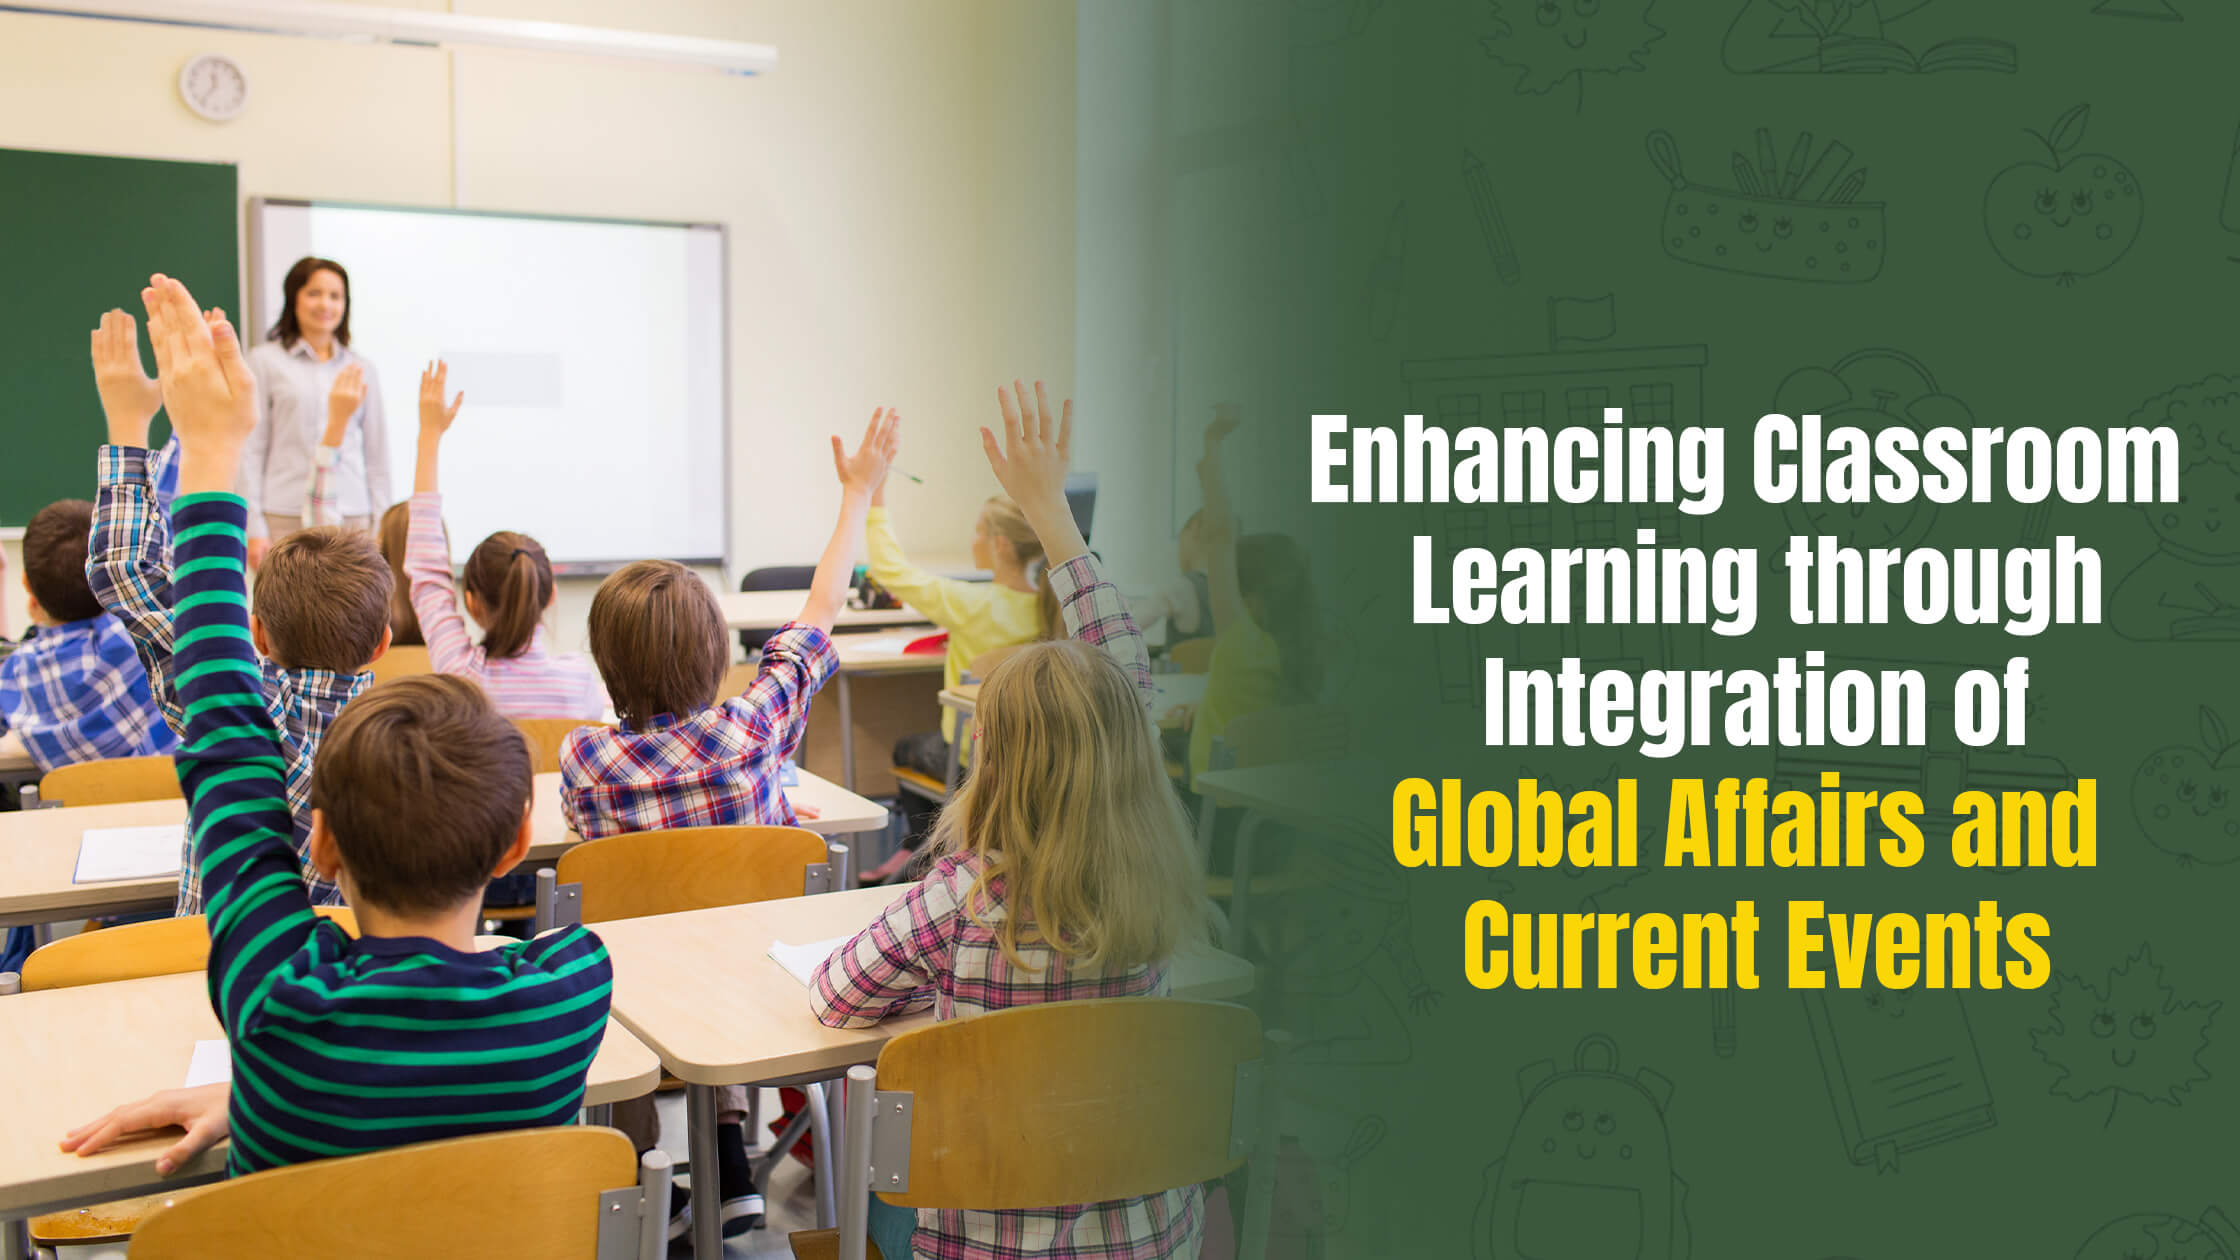 Enhancing Classroom Learning through Integration of Global Affairs and Current